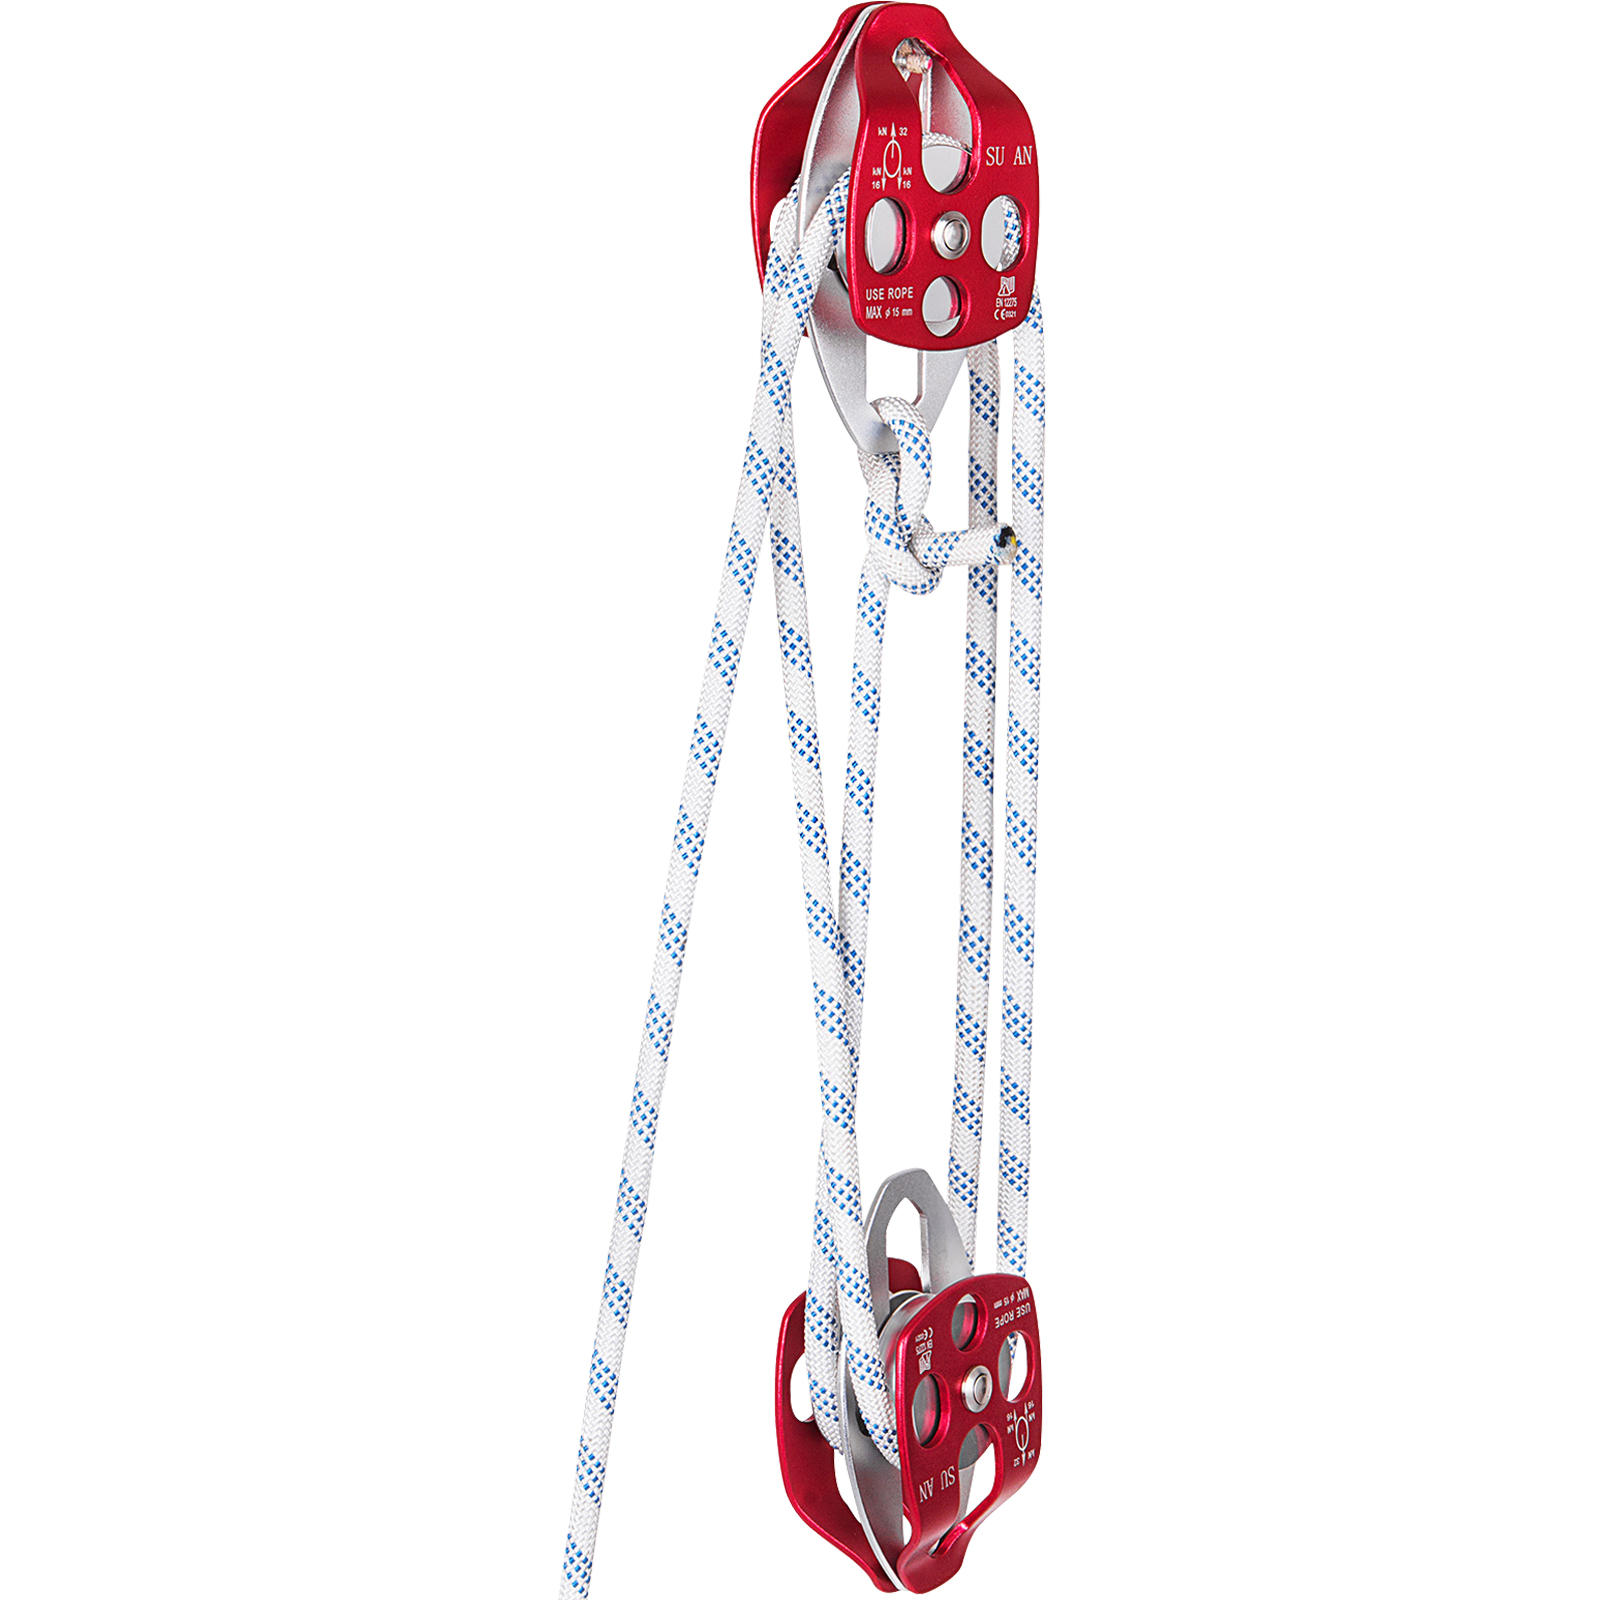 Twin Sheave Block and Tackle 6600lbs Pulley 250Ft, 7/16Inch Double Braid Rope от Vevor Many GEOs